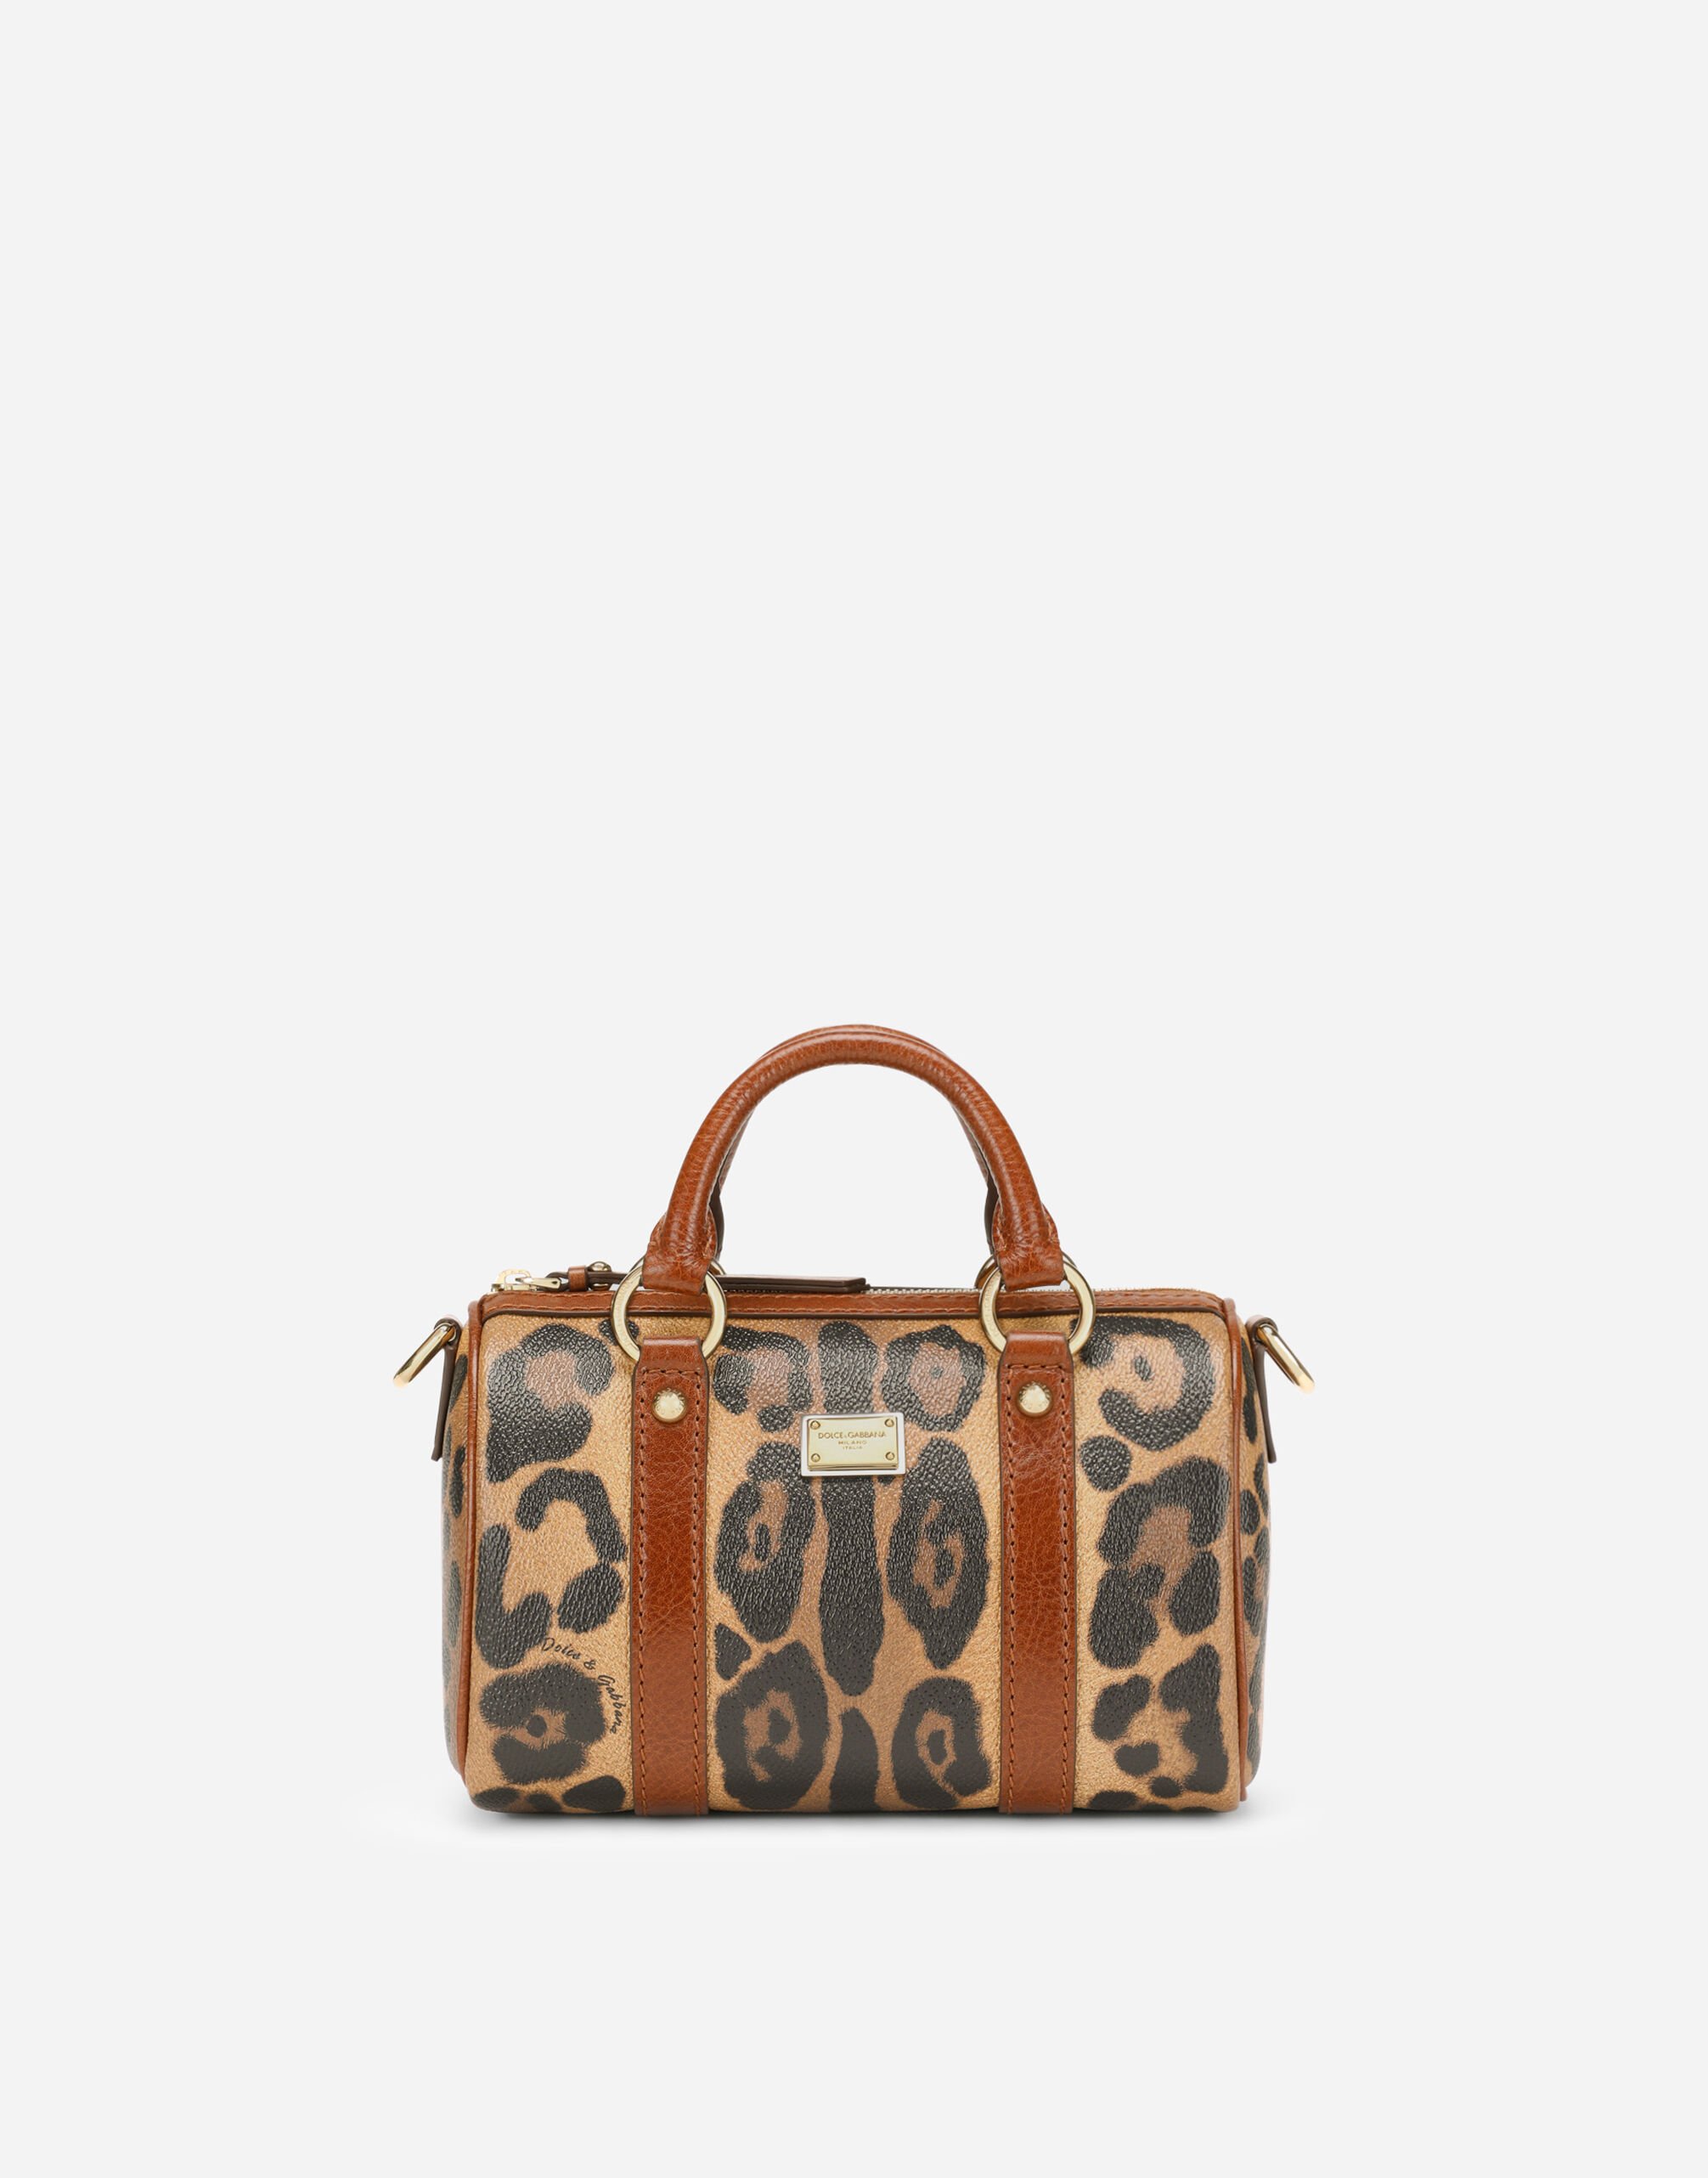 Dolce & Gabbana Small box satchel in leopard-print Crespo with branded plate Multicolor BB6933AW384